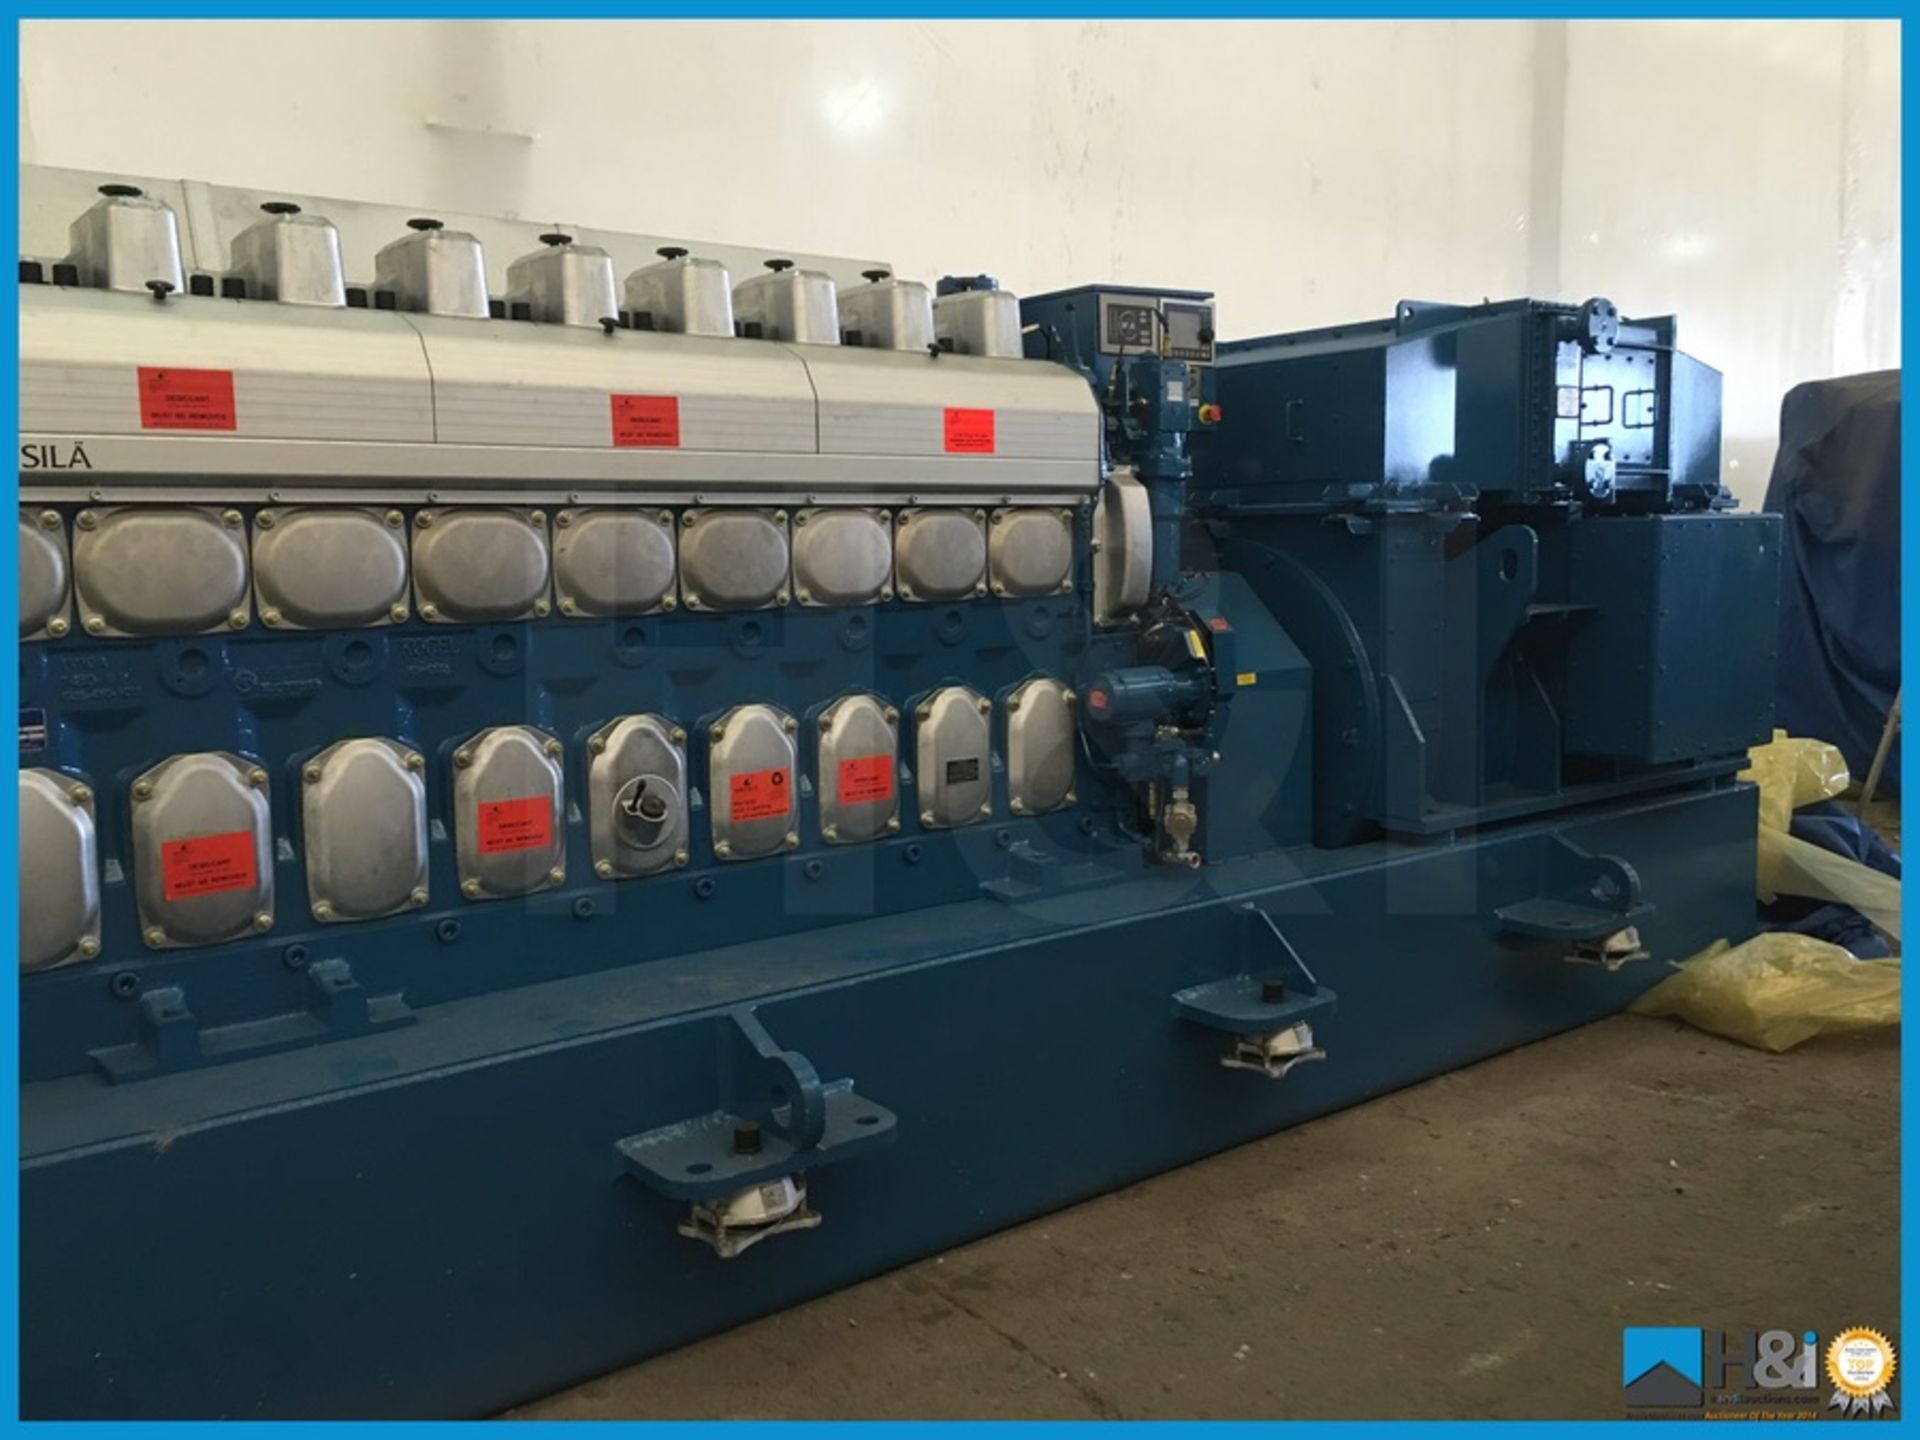 Unused Wartsila 9L20 high capacity diesel generator manufactured in 2013 for a large marine - Image 3 of 17